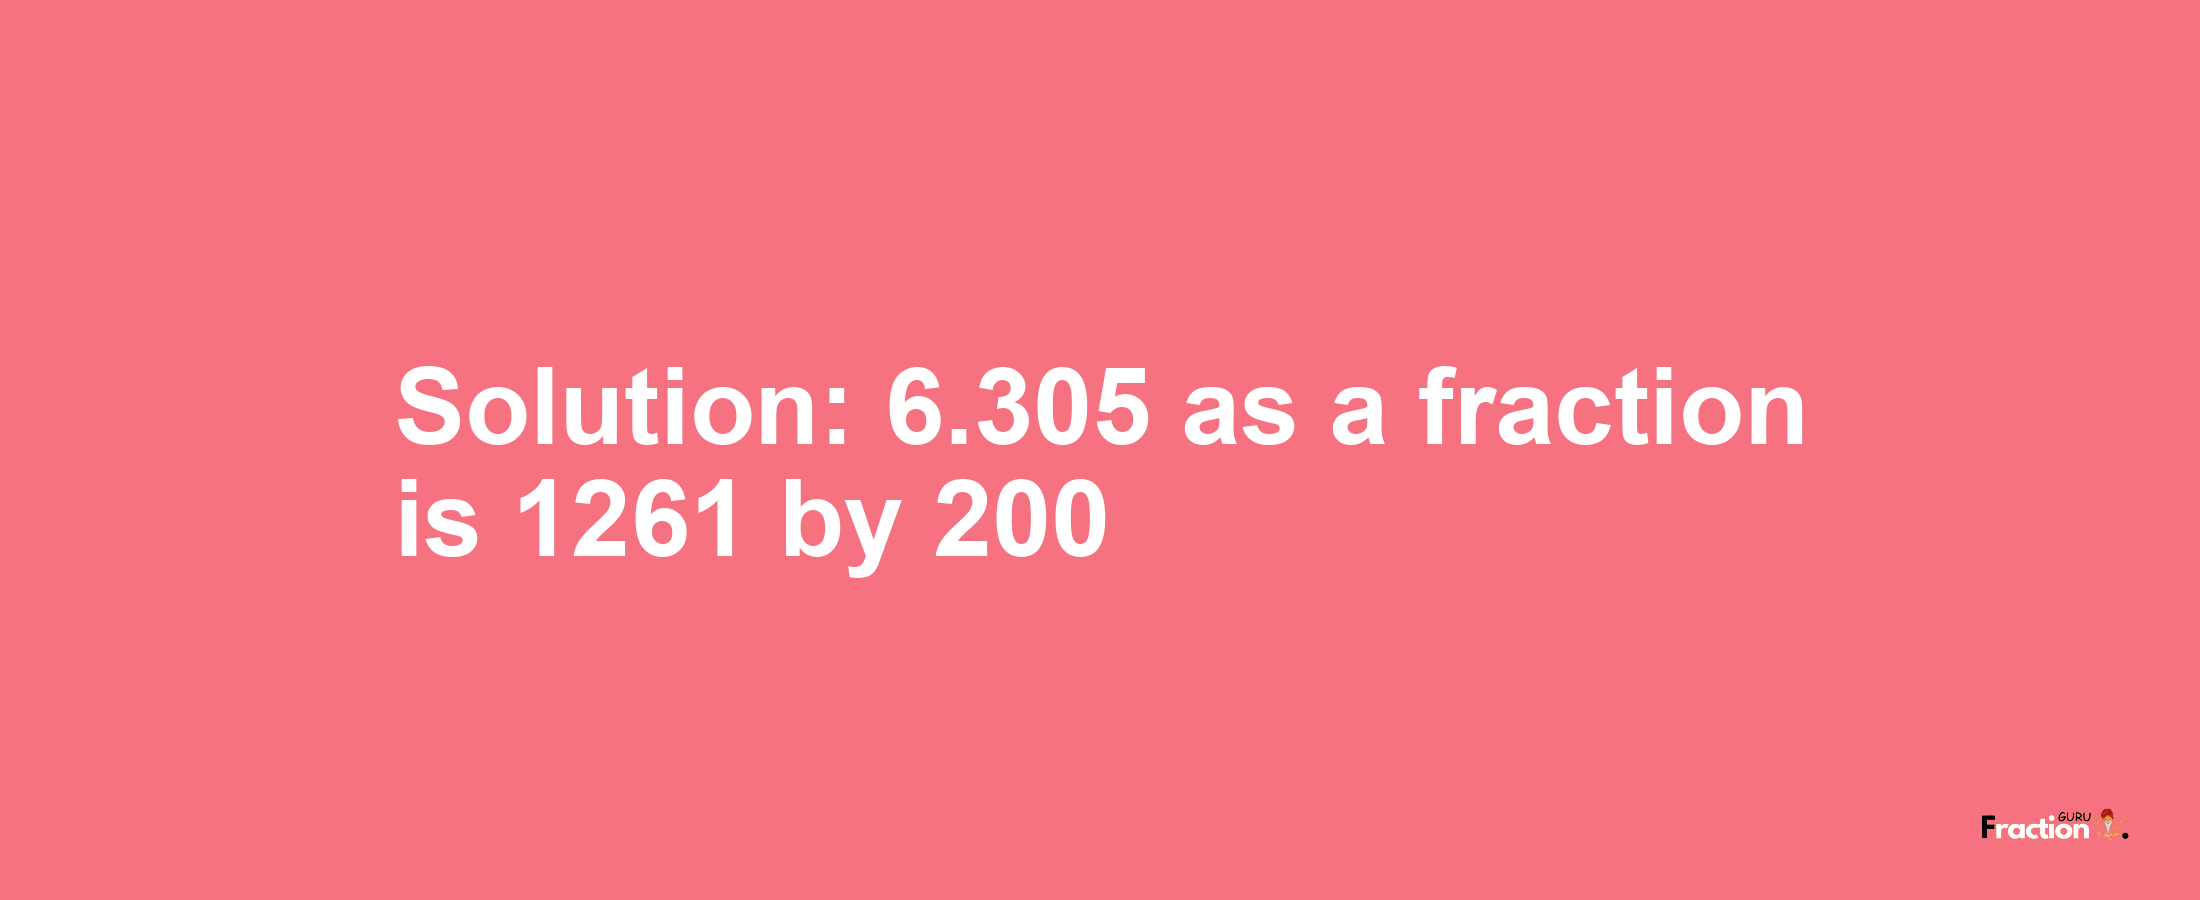 Solution:6.305 as a fraction is 1261/200